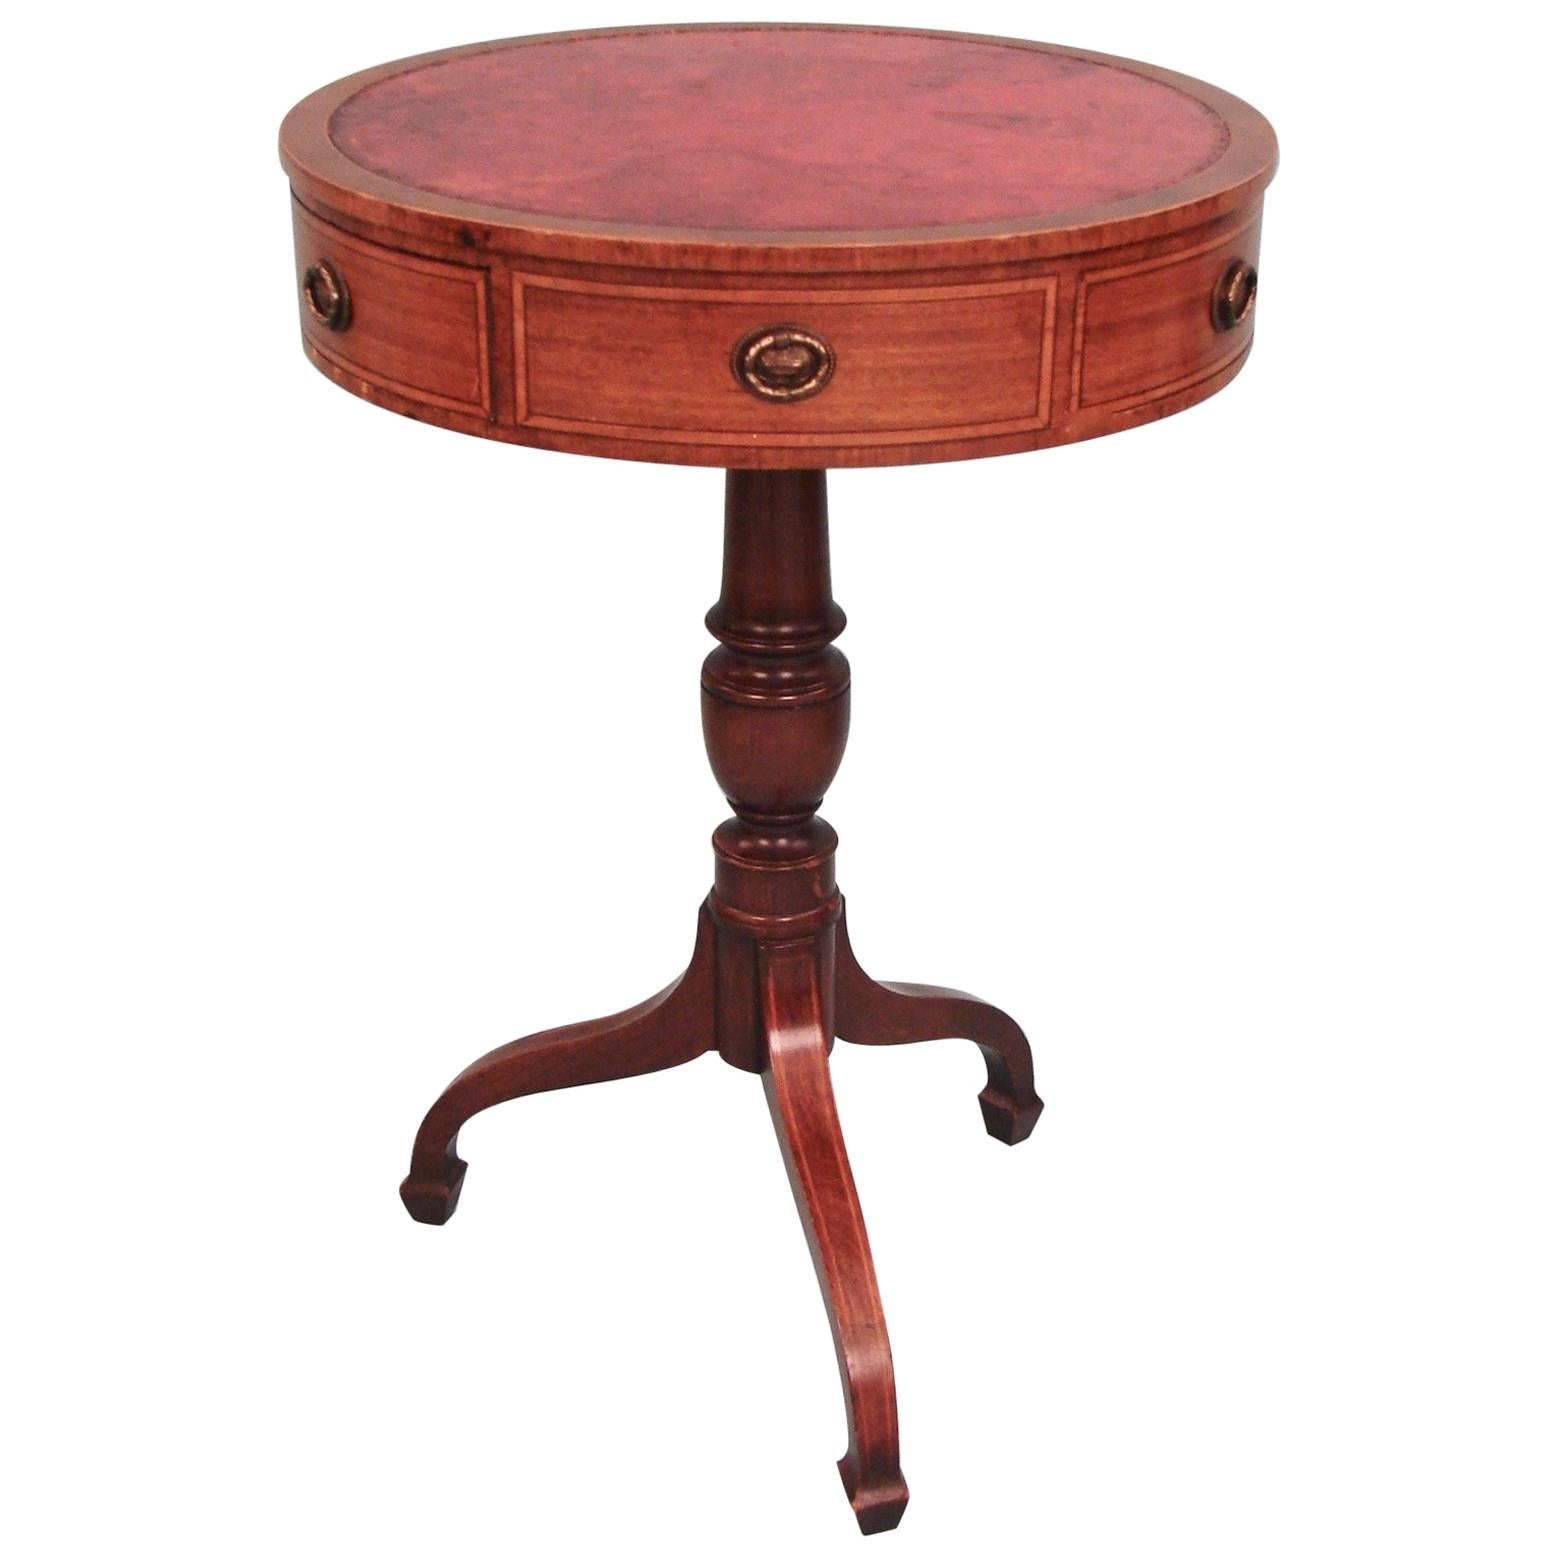 Regency Style Inlaid Mahogany Small Drum Table with Tooled Red Leather Top